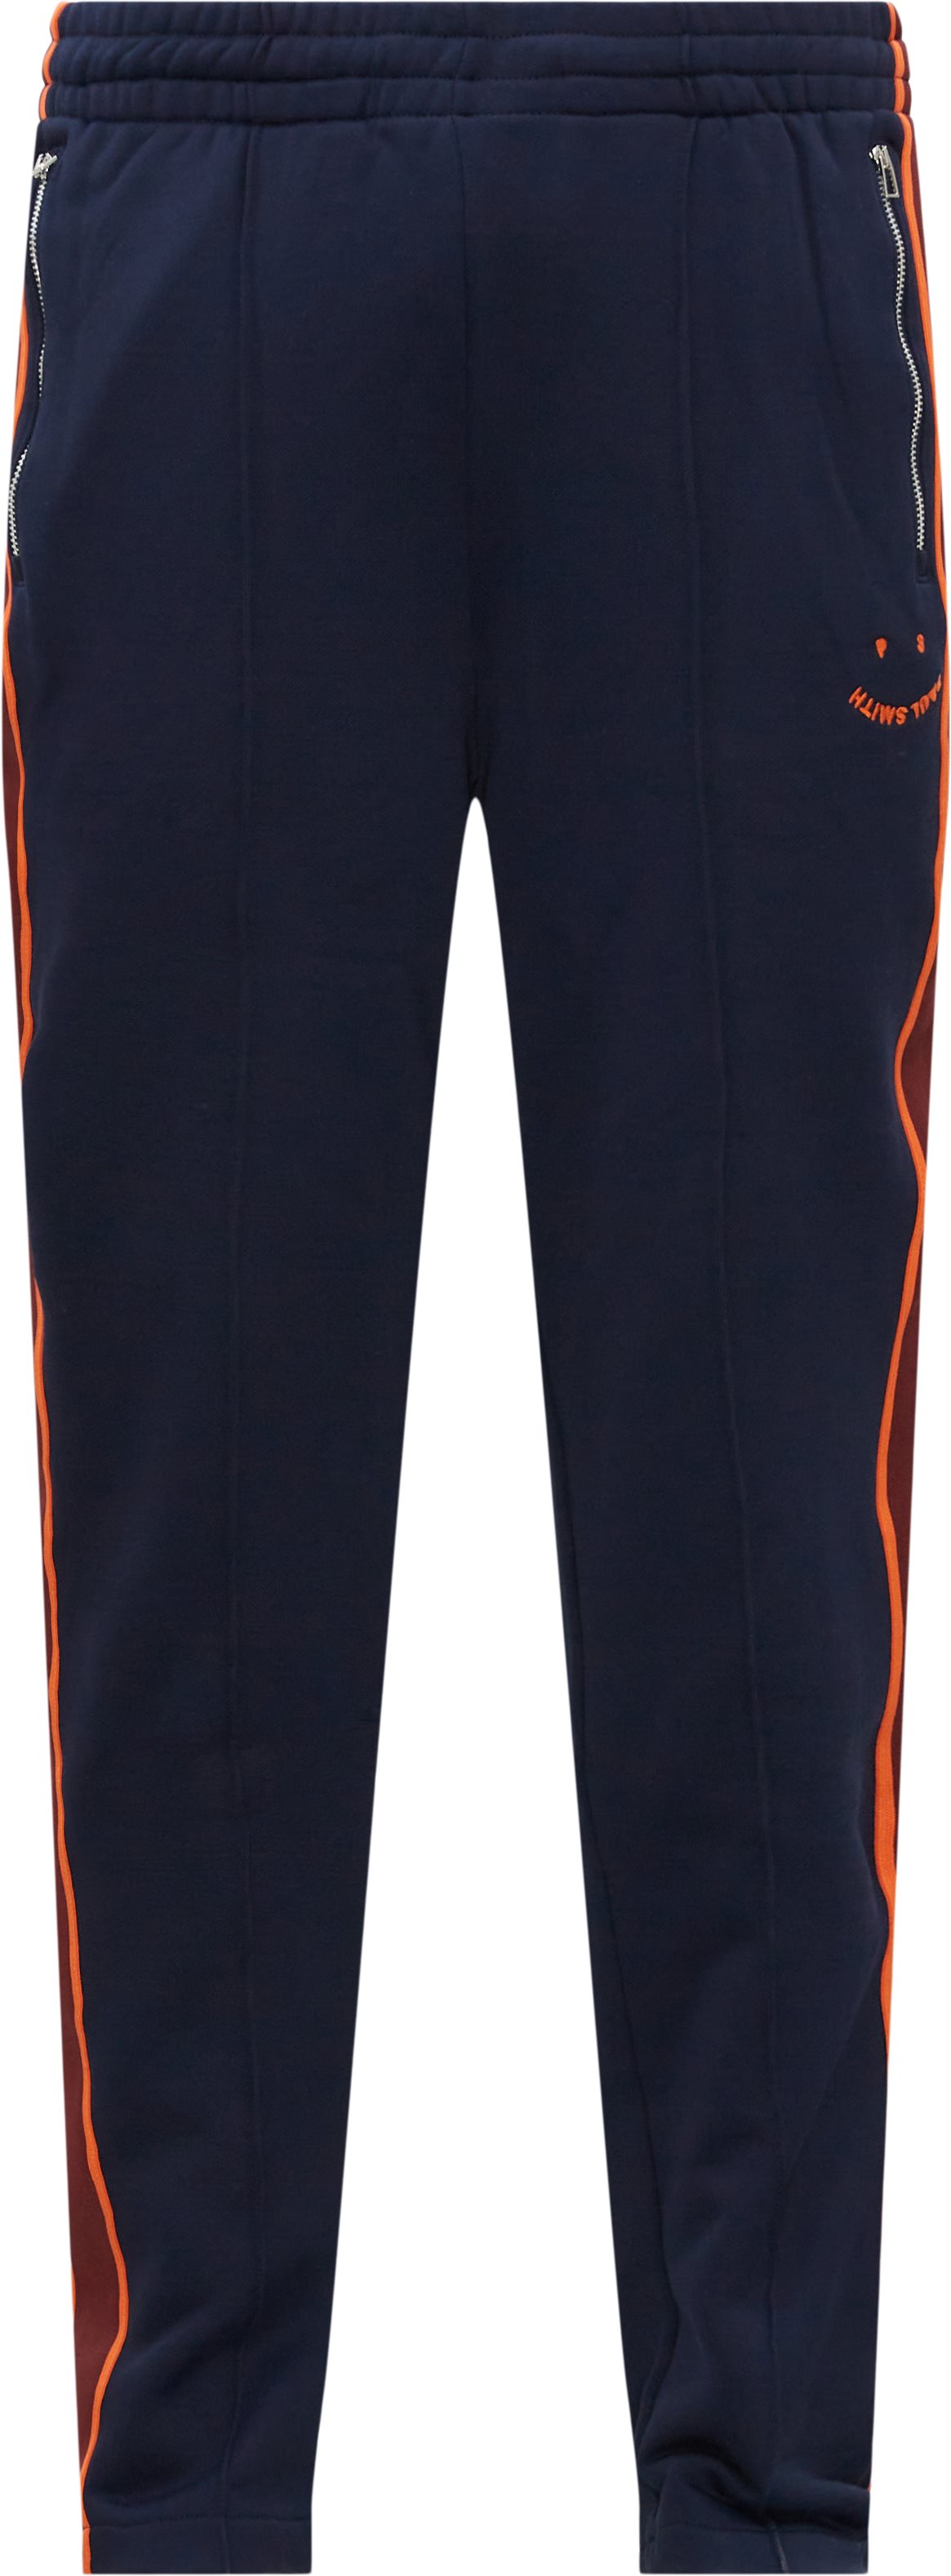 PS Paul Smith Trousers 689X K21587 Blue